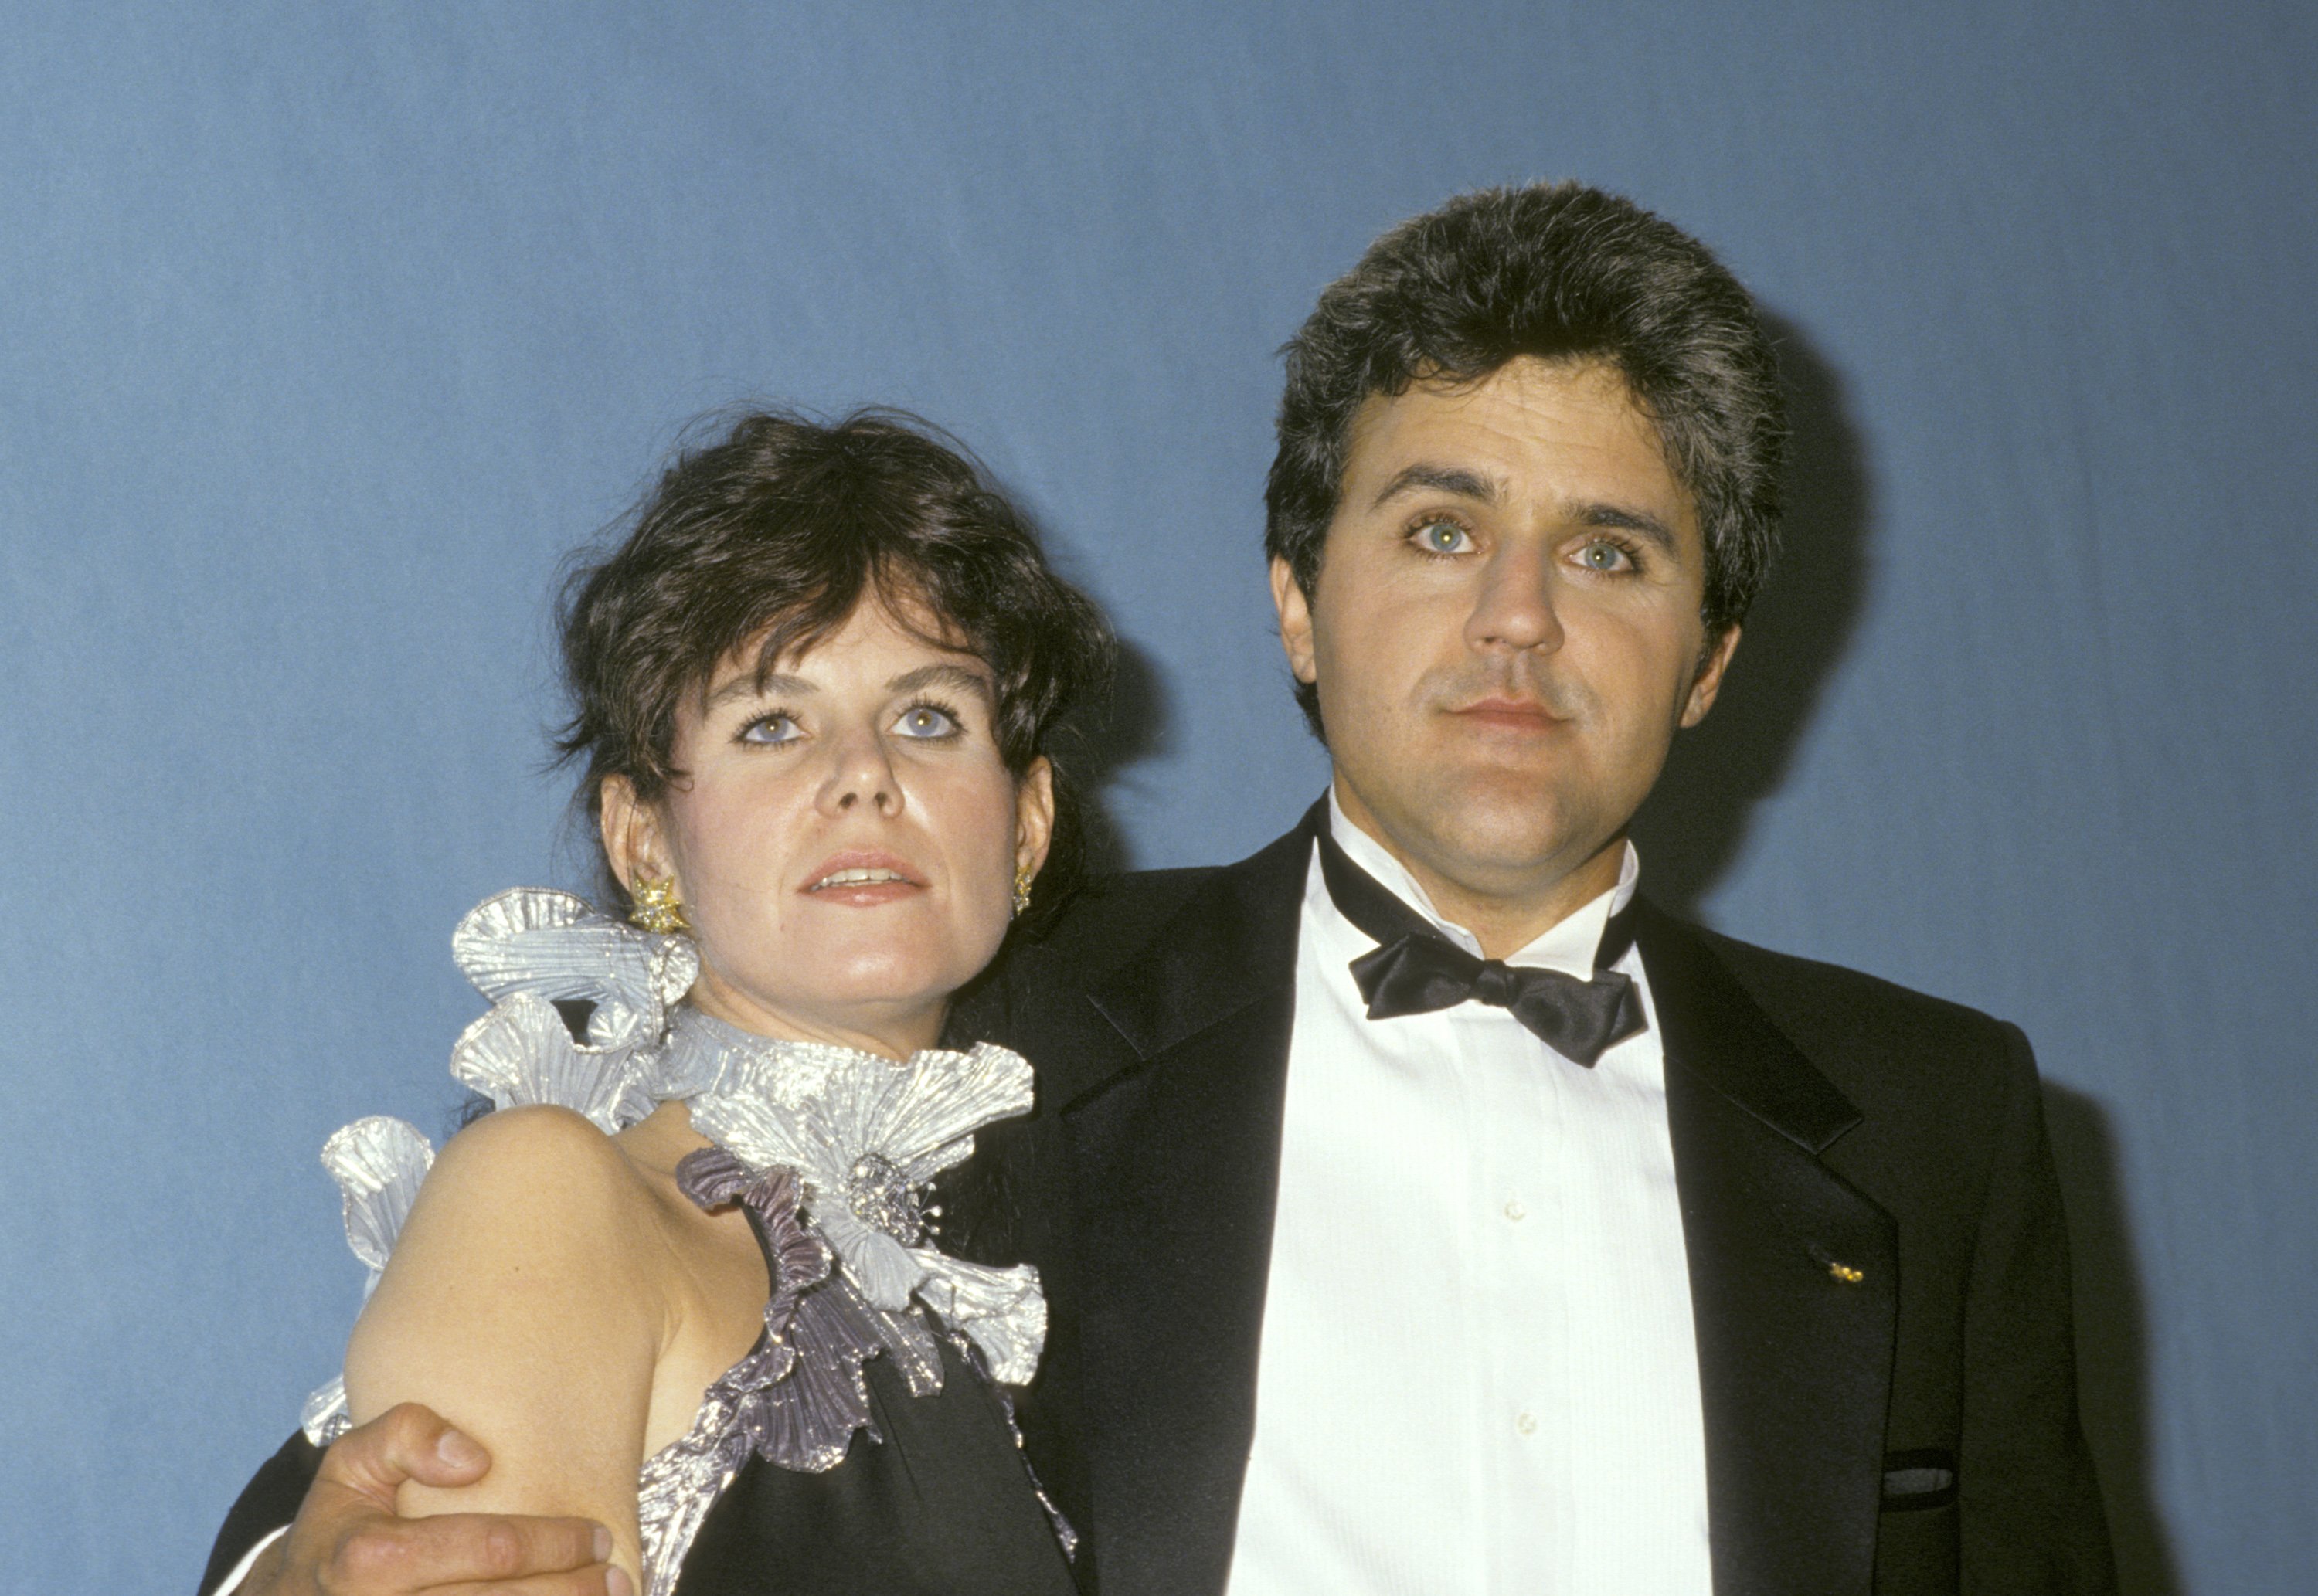 Mavis Leno and her husband Jay Leno attend the 39th Annual Emmy Awards at Pasadena Civic Auditorium on September 20, 1987, in Pasadena, California. | Source: Getty Images